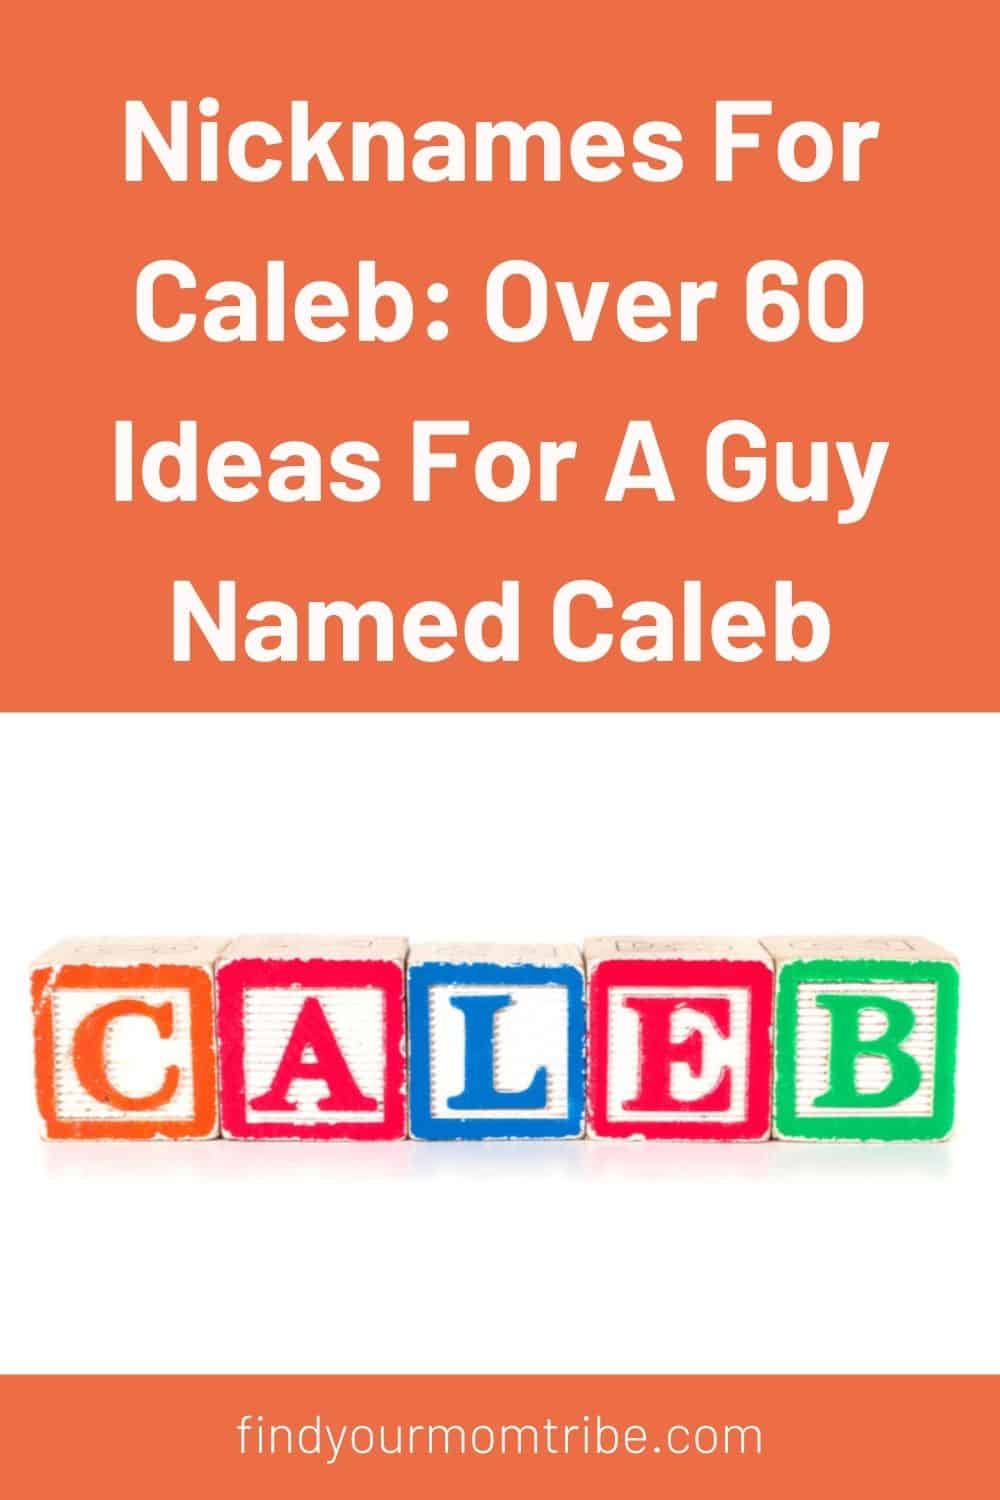 Nicknames for caleb: ideas and inspiration